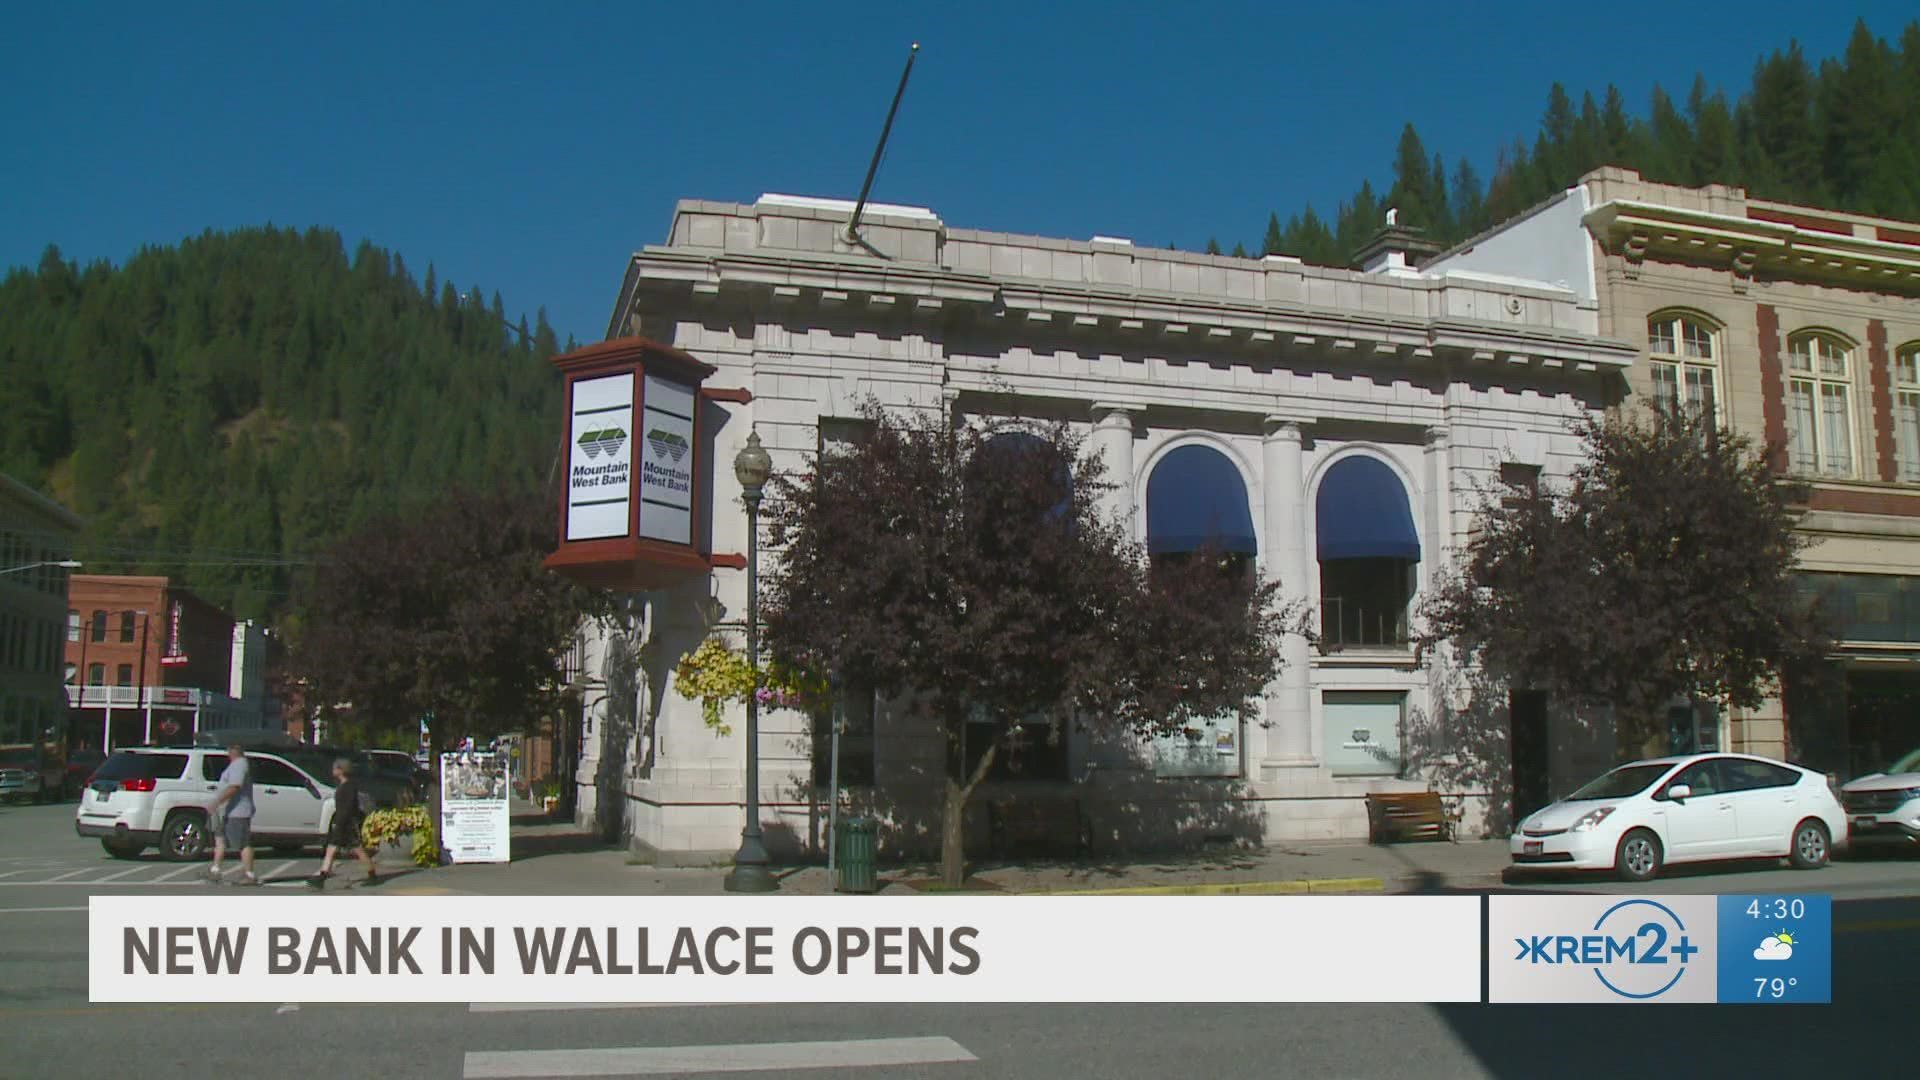 The only bank in the town of Wallace closed 10 month ago forcing people to travel long distances to get bank services.